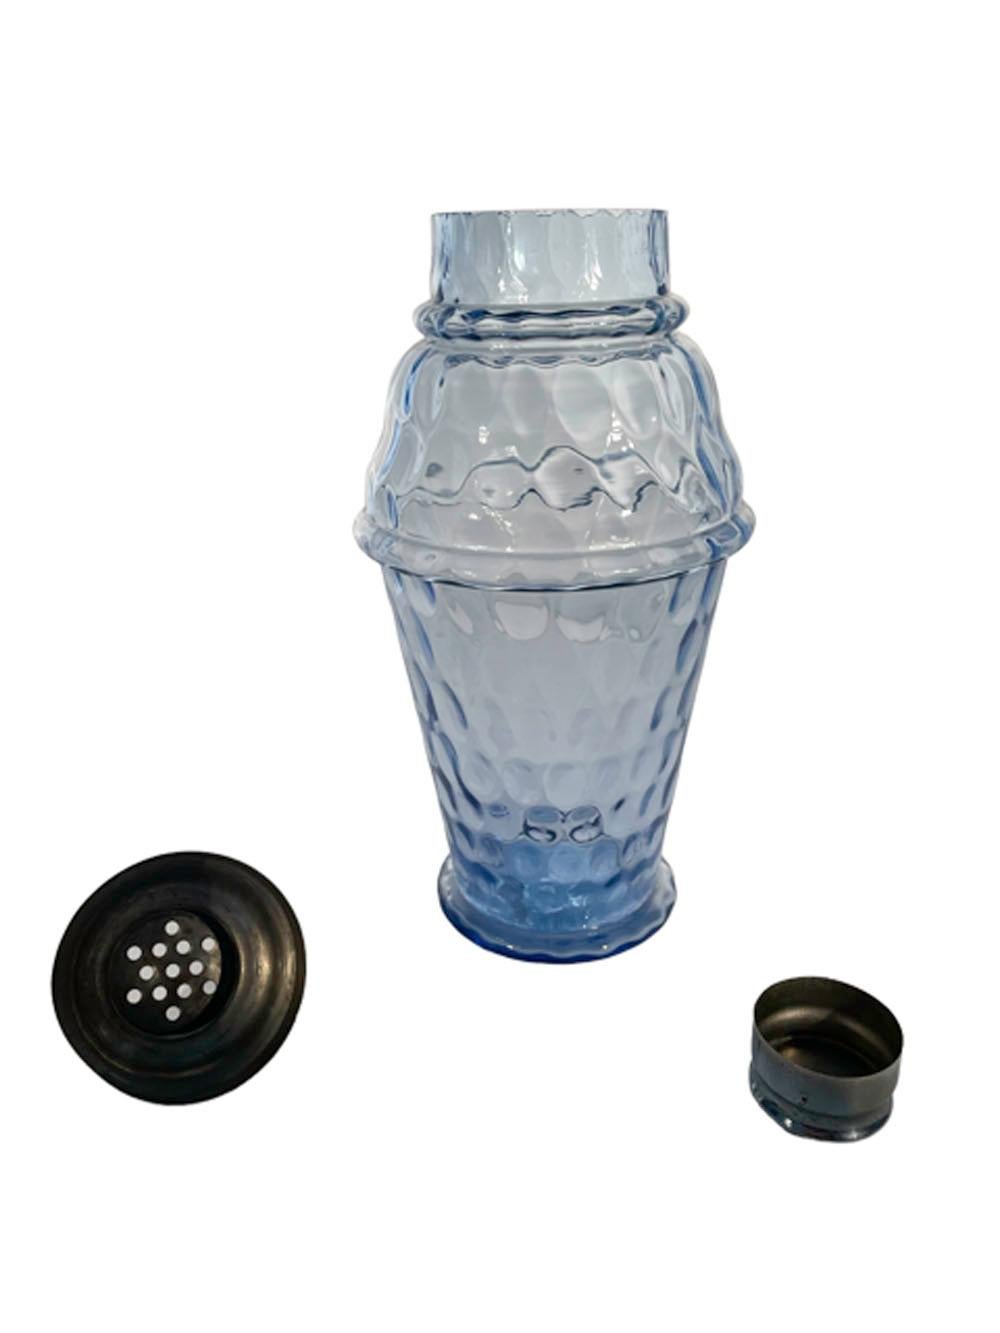 Art Deco molded cocktail shaker in pale cobalt blue glass with all-over thumbprint or coin spot pattern with a domed center pour chrome lid and cap.